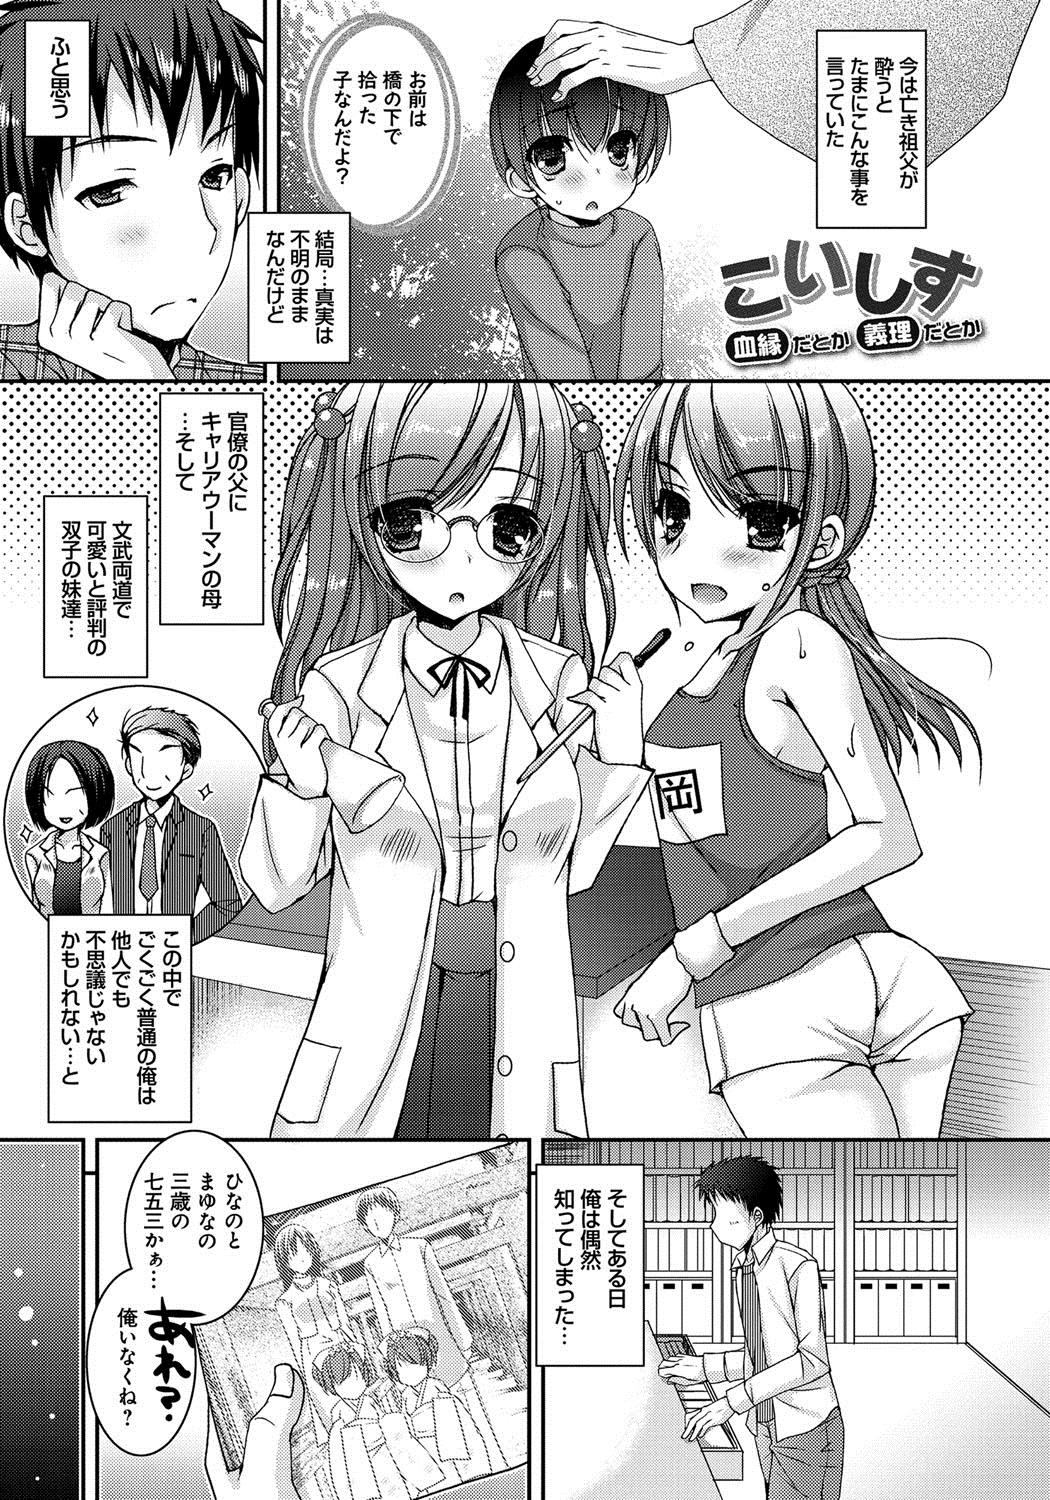 Oriental Amai Shimai - The Sisters so Sweet Her - Page 4